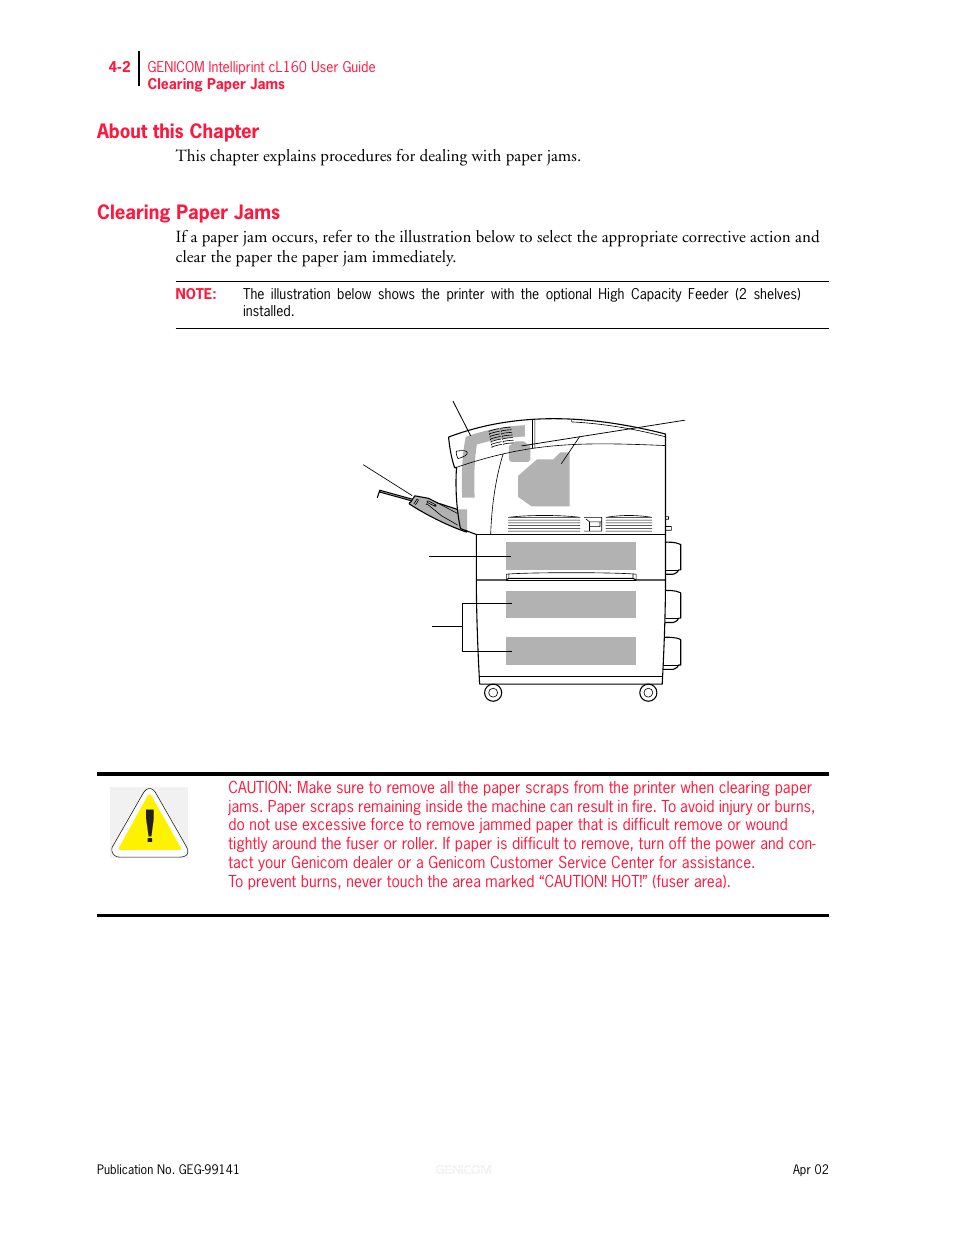 About this chapter, Clearing paper jams, Clearing paper jams 4-2 | Genicom cL160 User Manual | Page 102 / 216